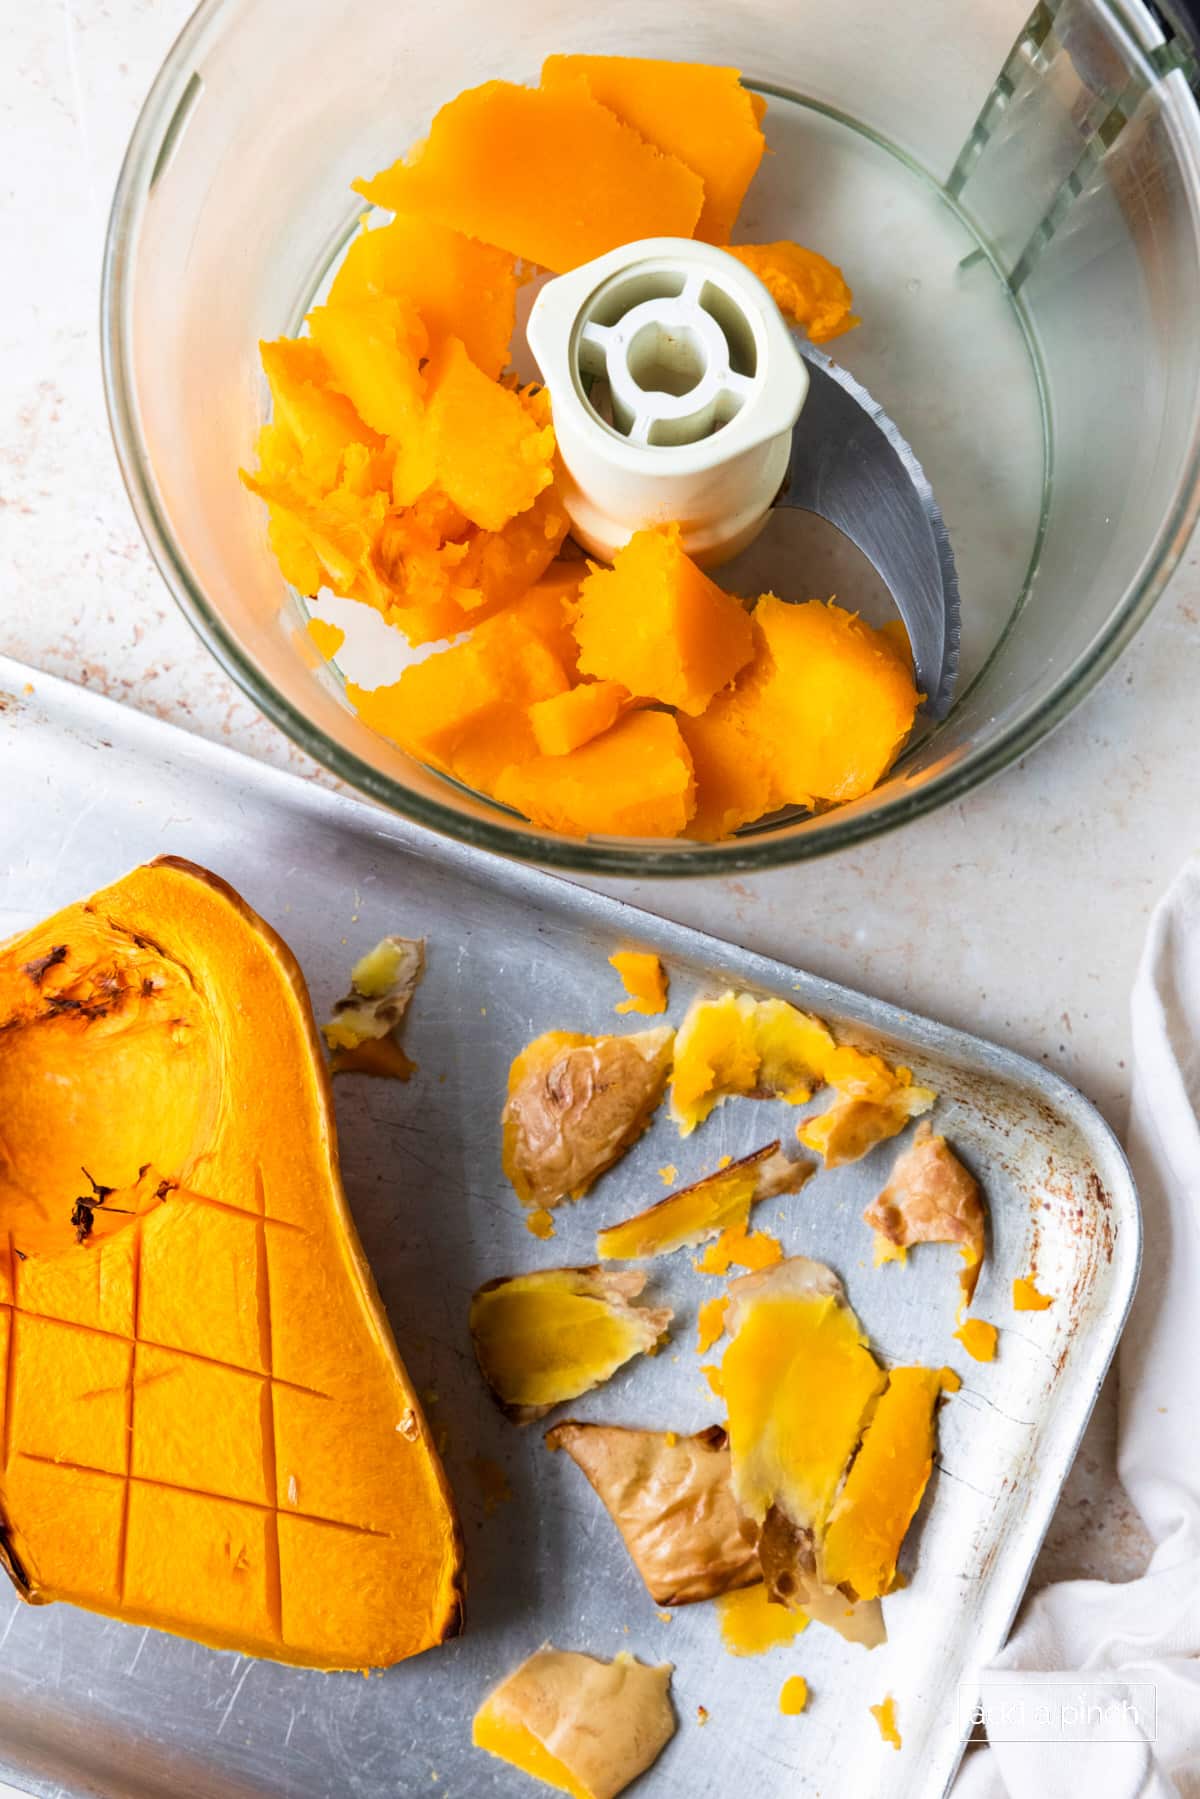 Roasted butternut squash on a baking sheet and being added to a food processor.